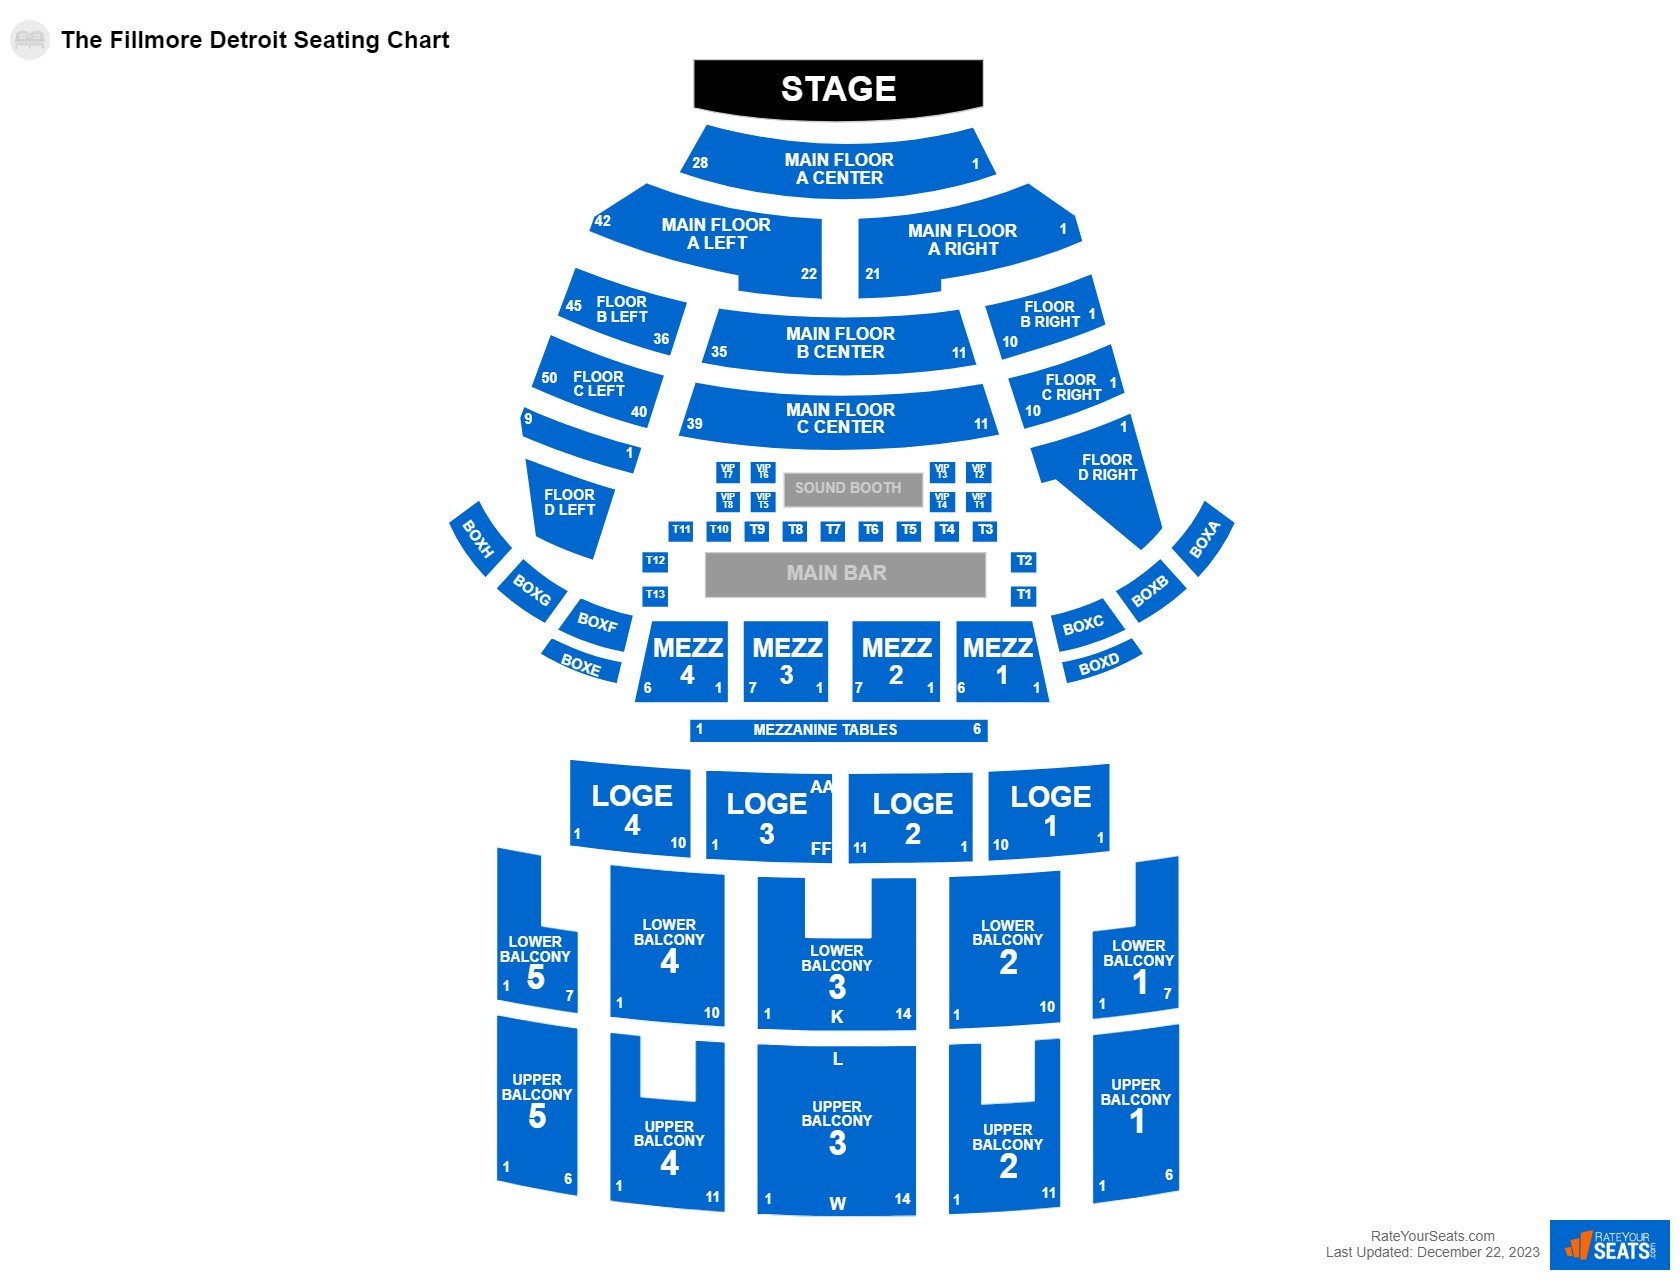 The Fillmore Detroit Seating Chart